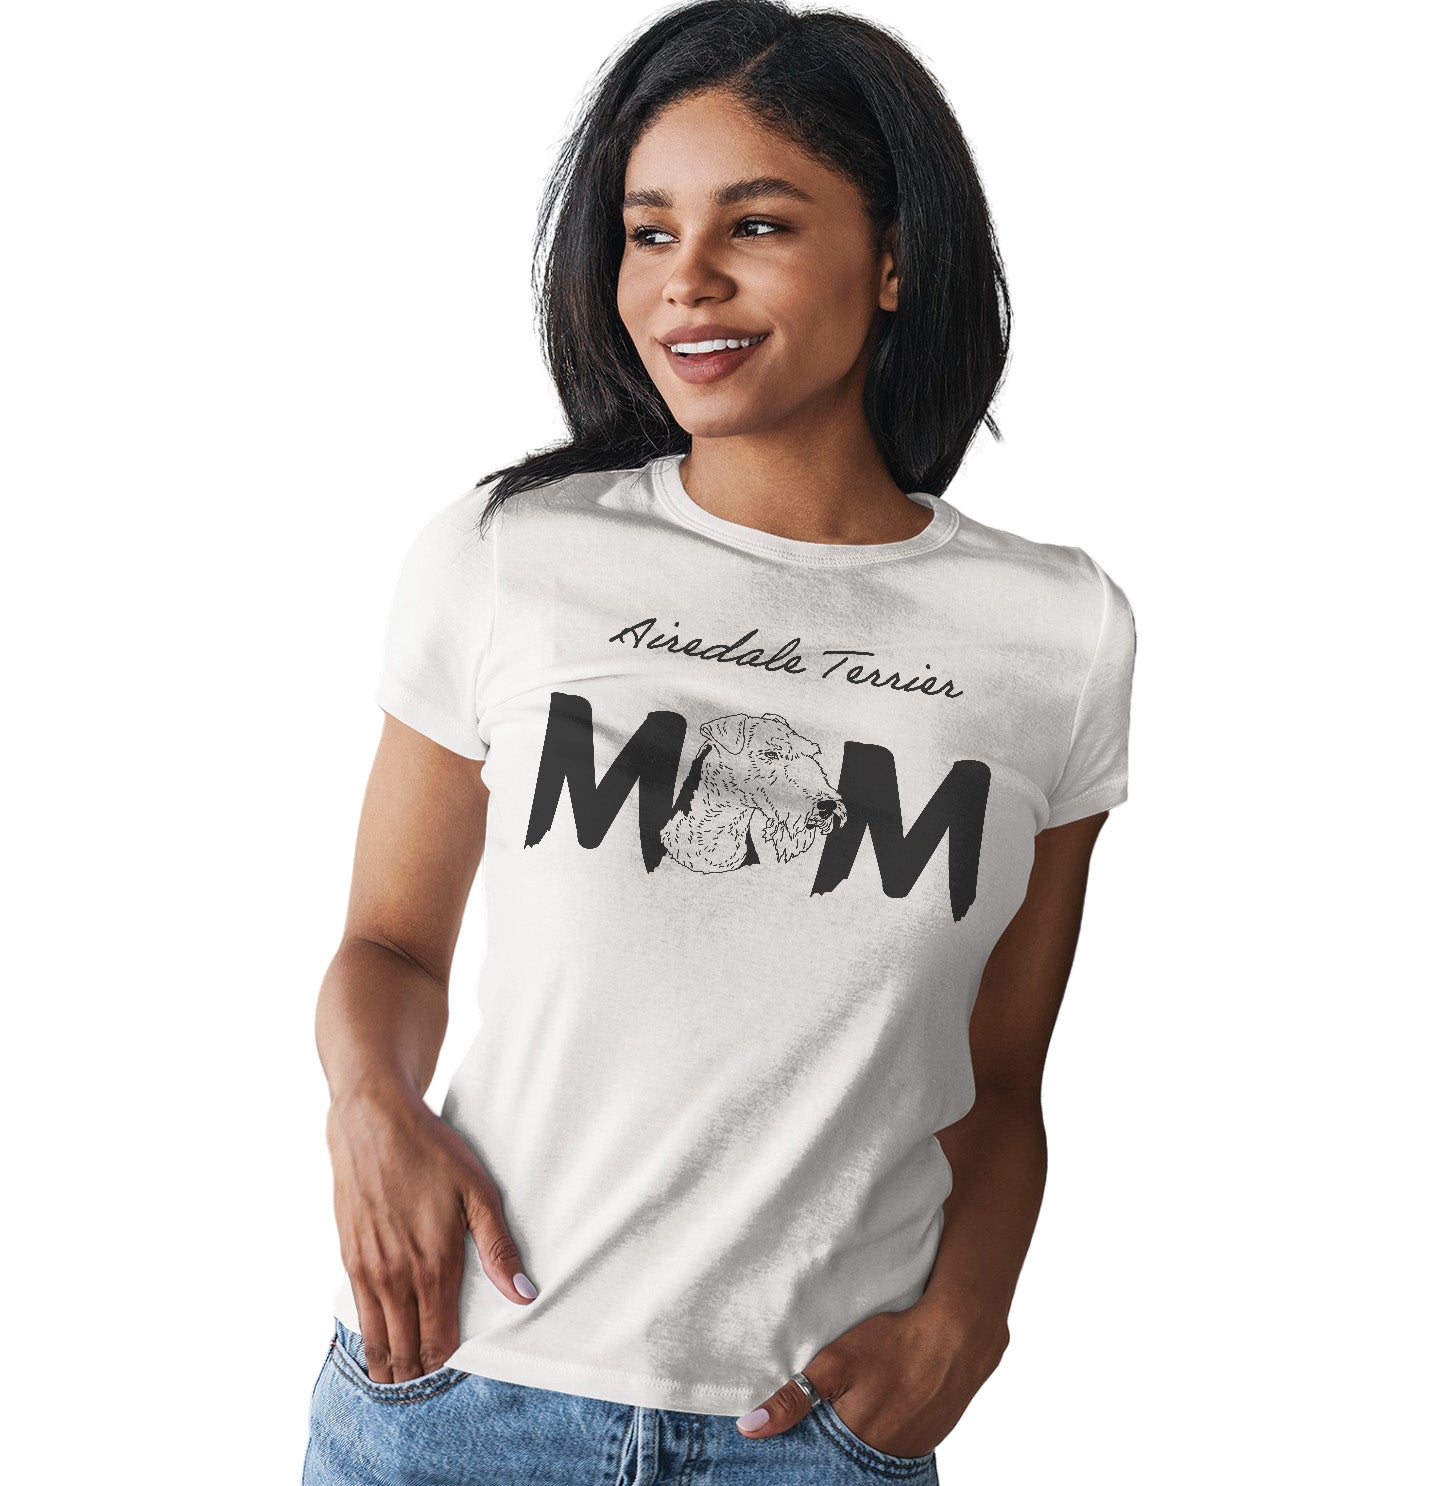 Airedale Terrier Breed Mom - Women's Fitted T-Shirt